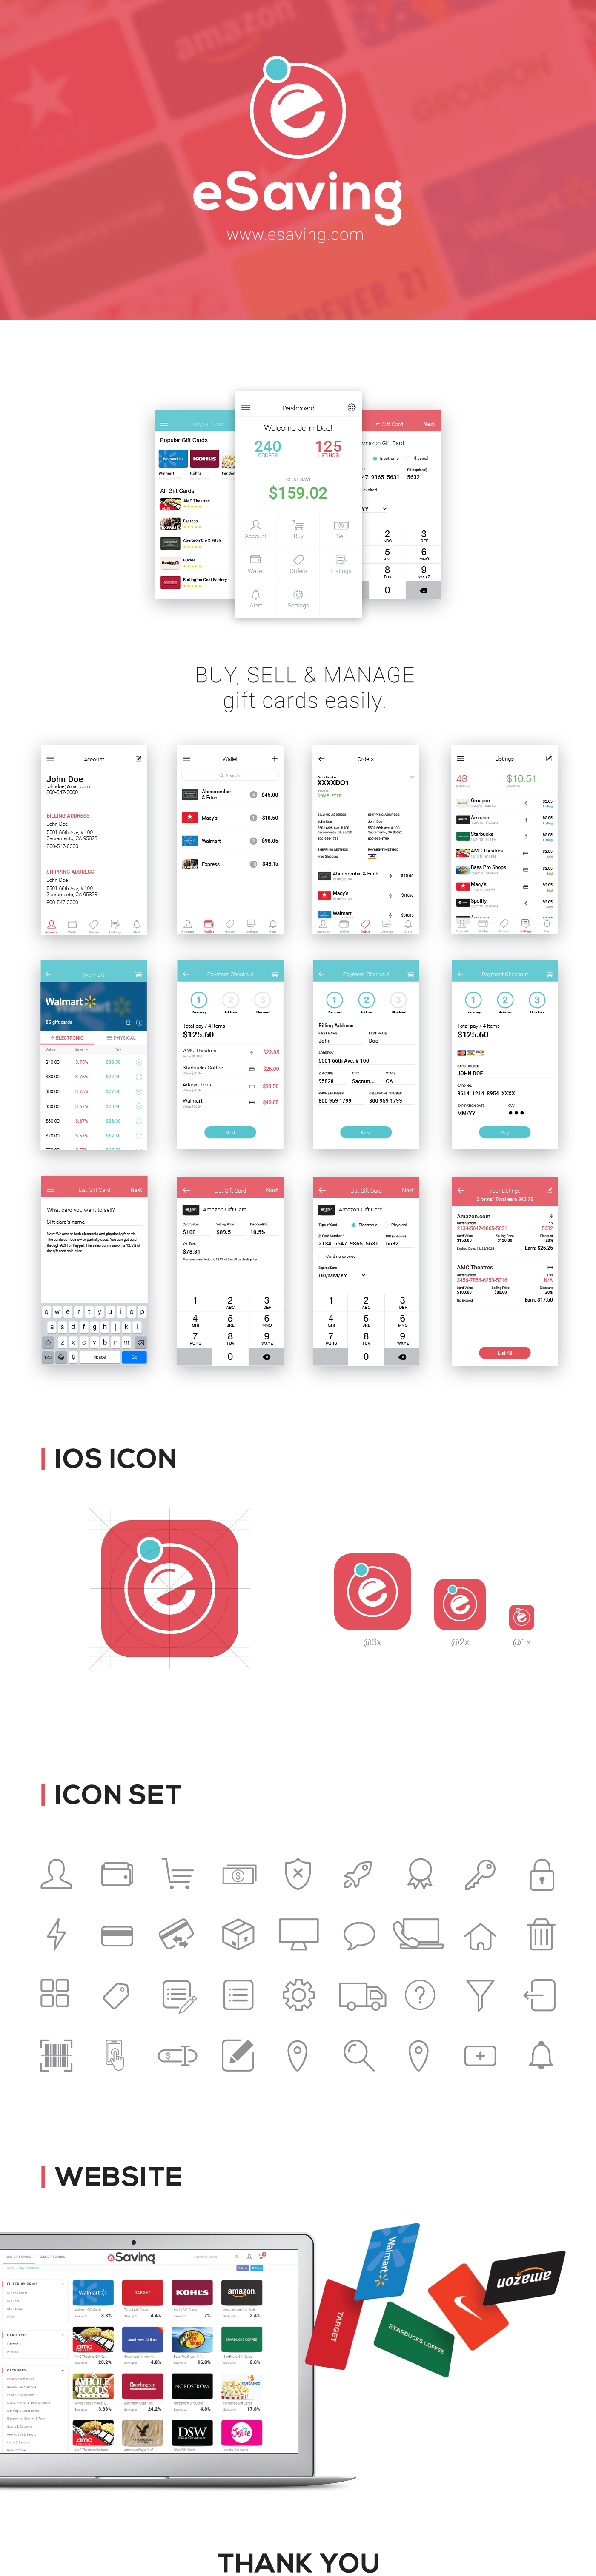 Mobile app concept Marketplace gift card